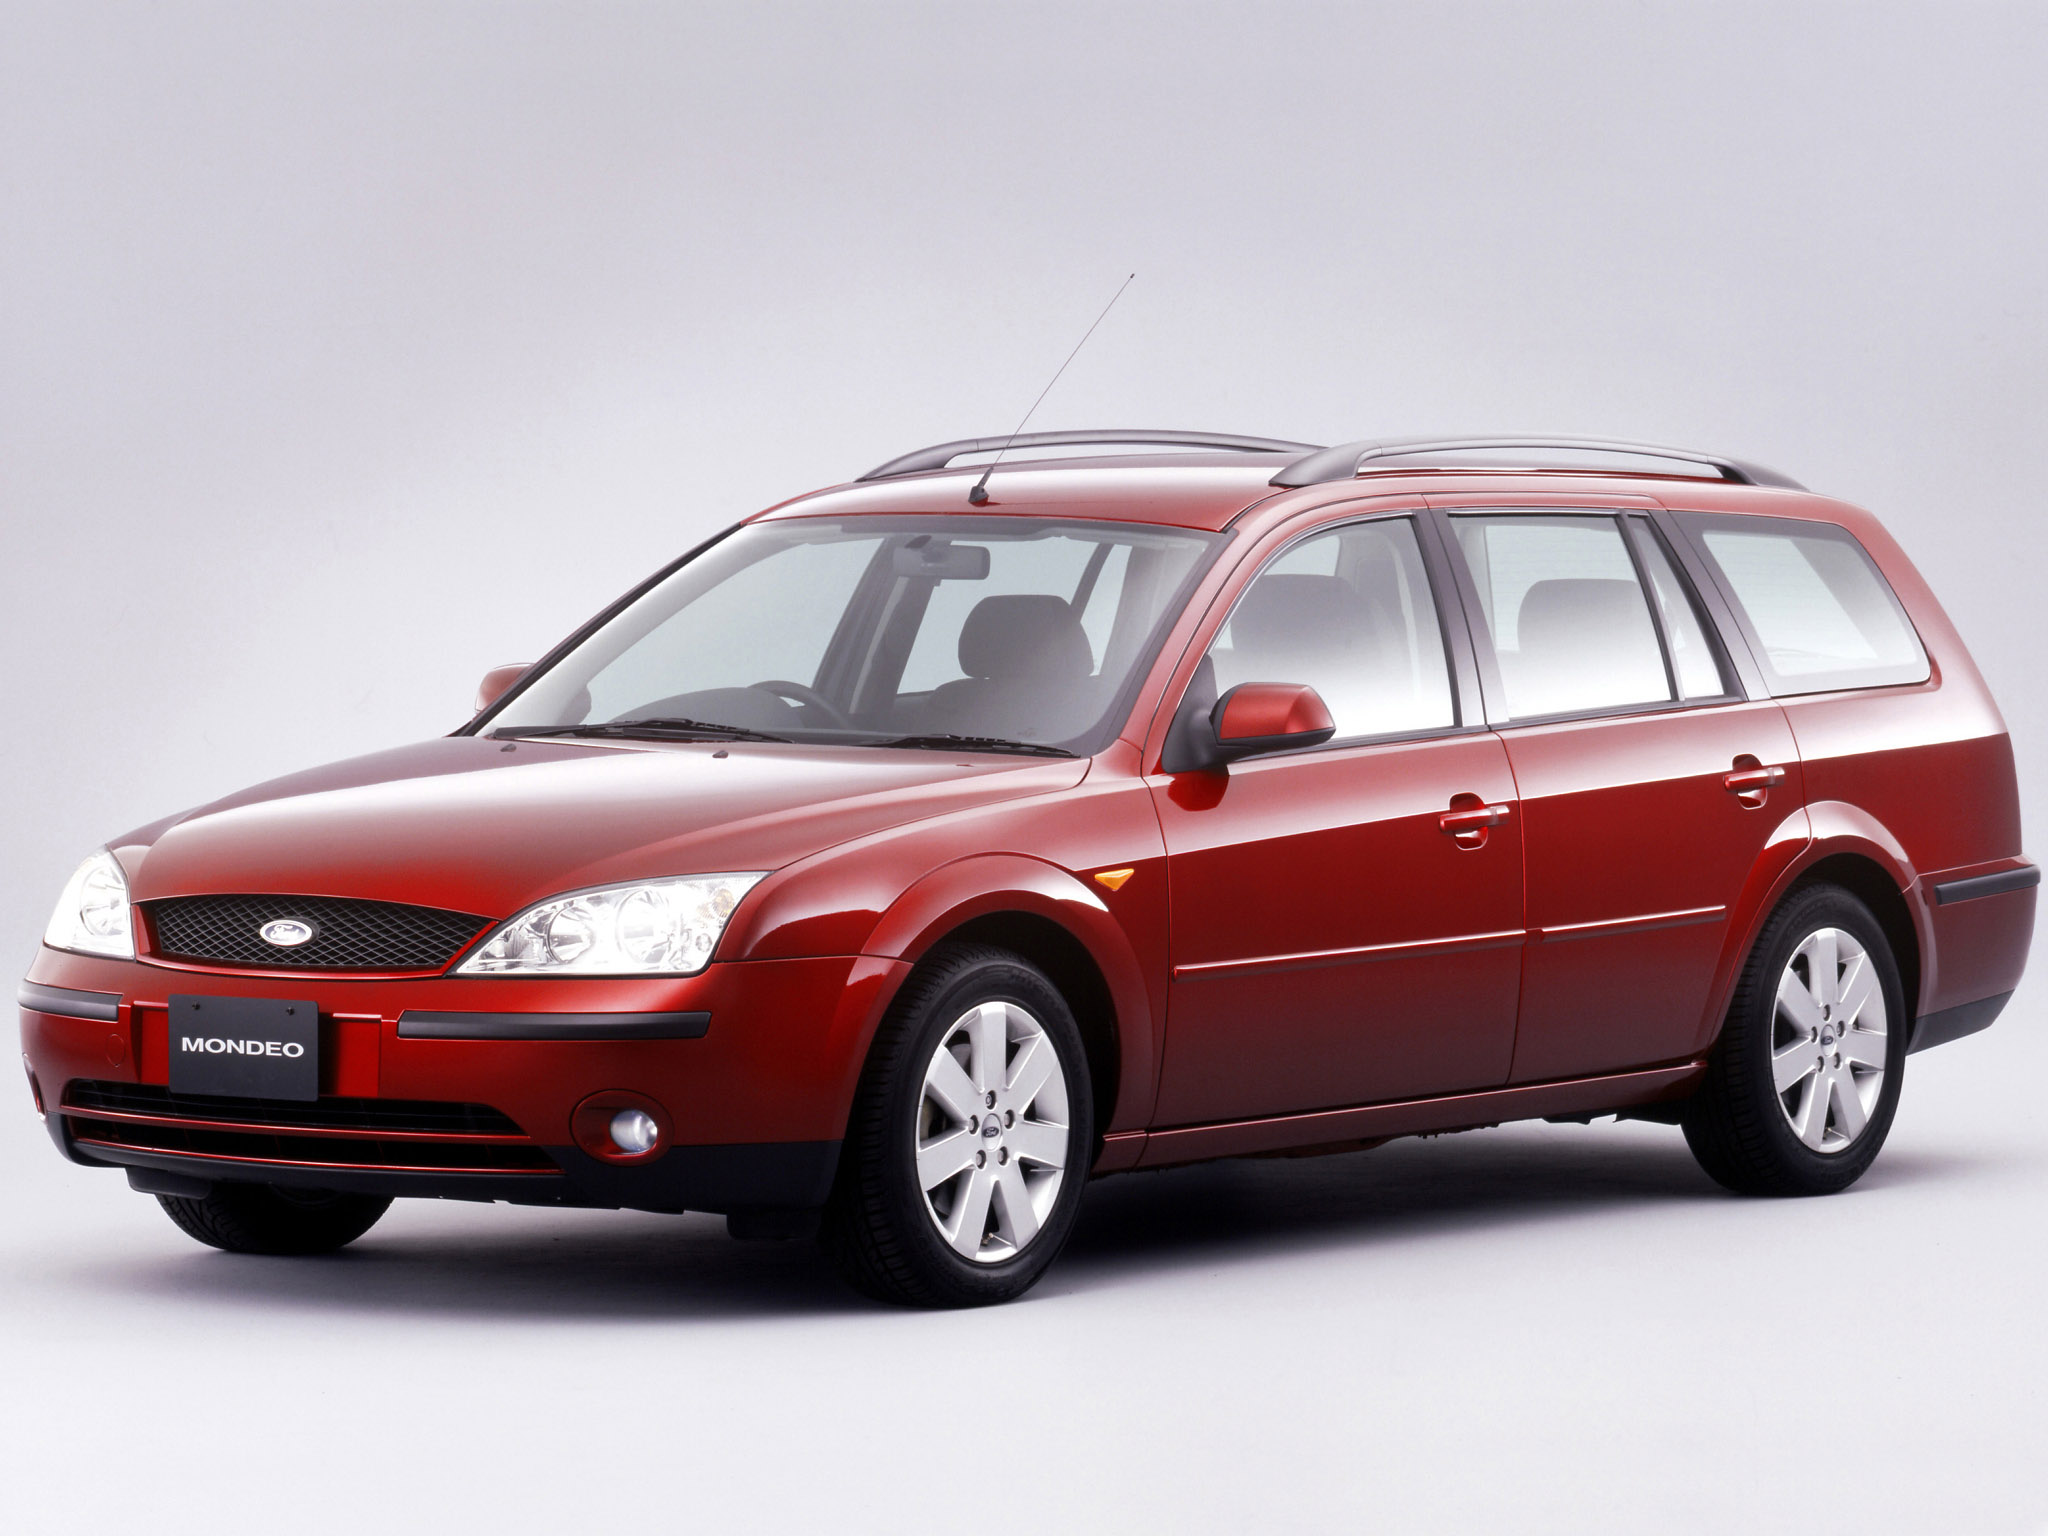 Ford Mondeo Japan 2000-2004 Photo 02 | Car in pictures car photo